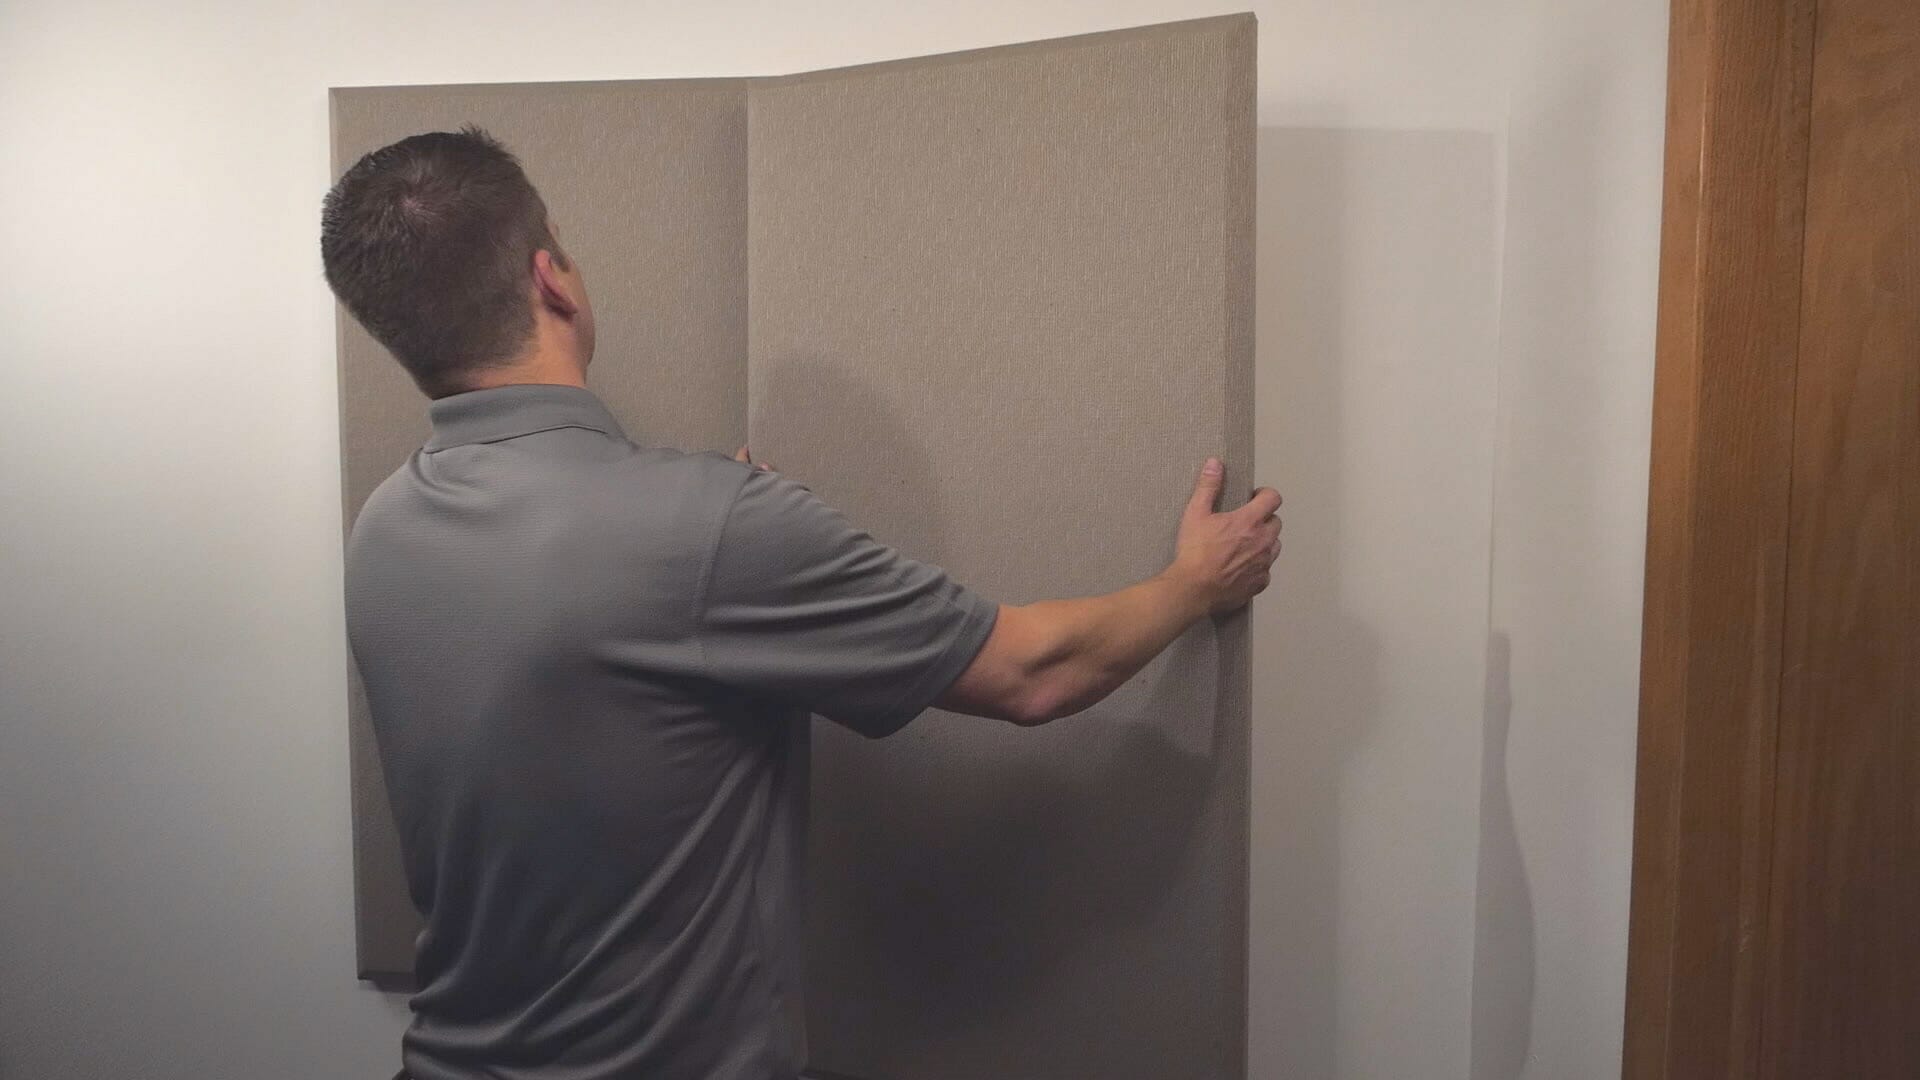 Installing Fabric-Wrapped Acoustic Panels